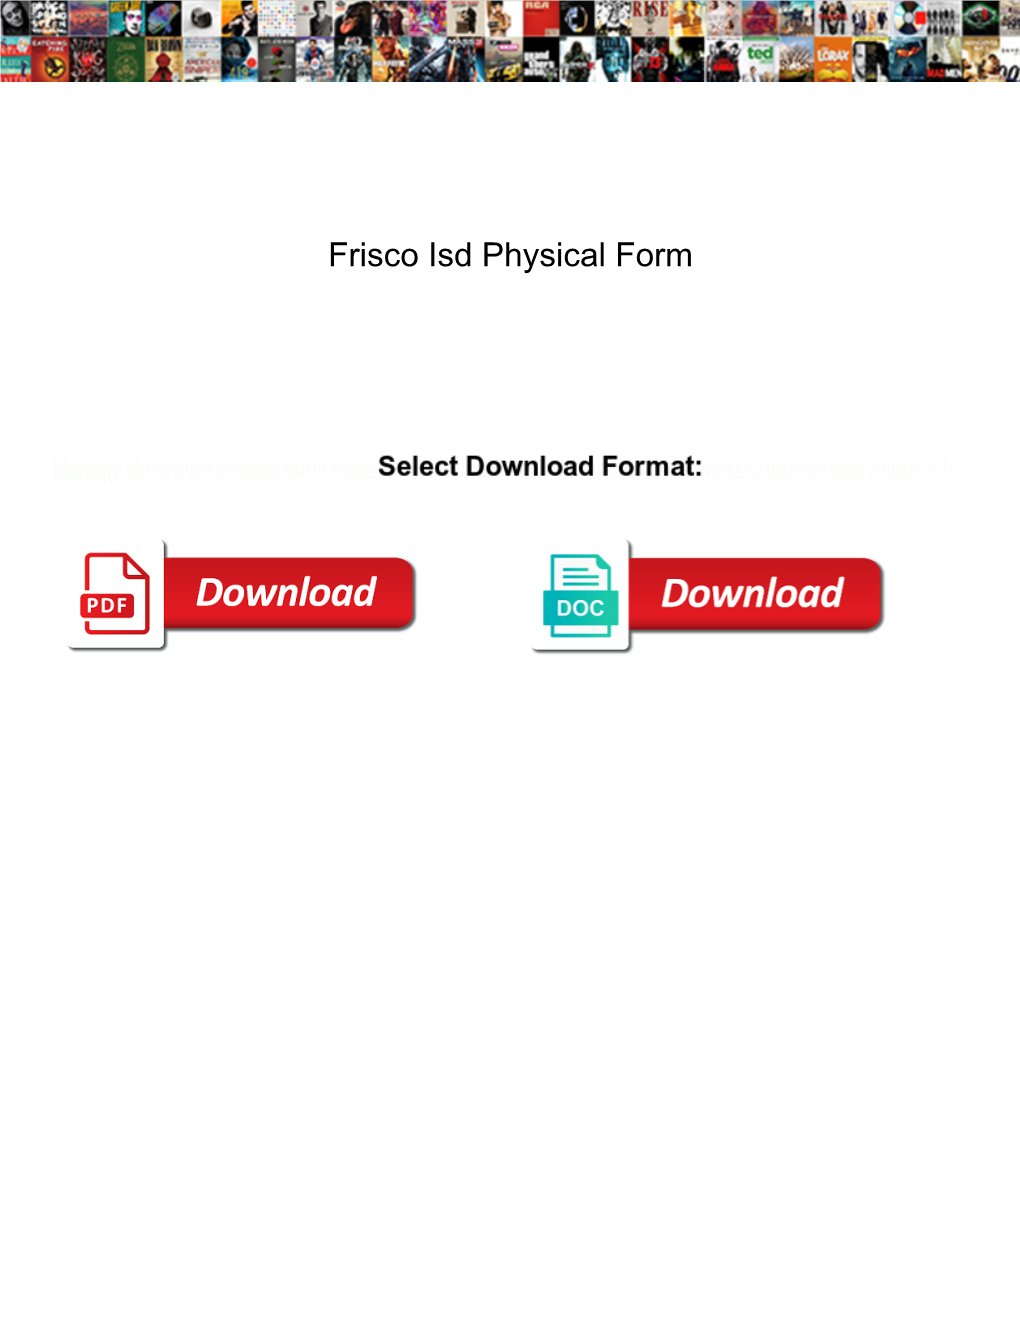 Frisco Isd Physical Form